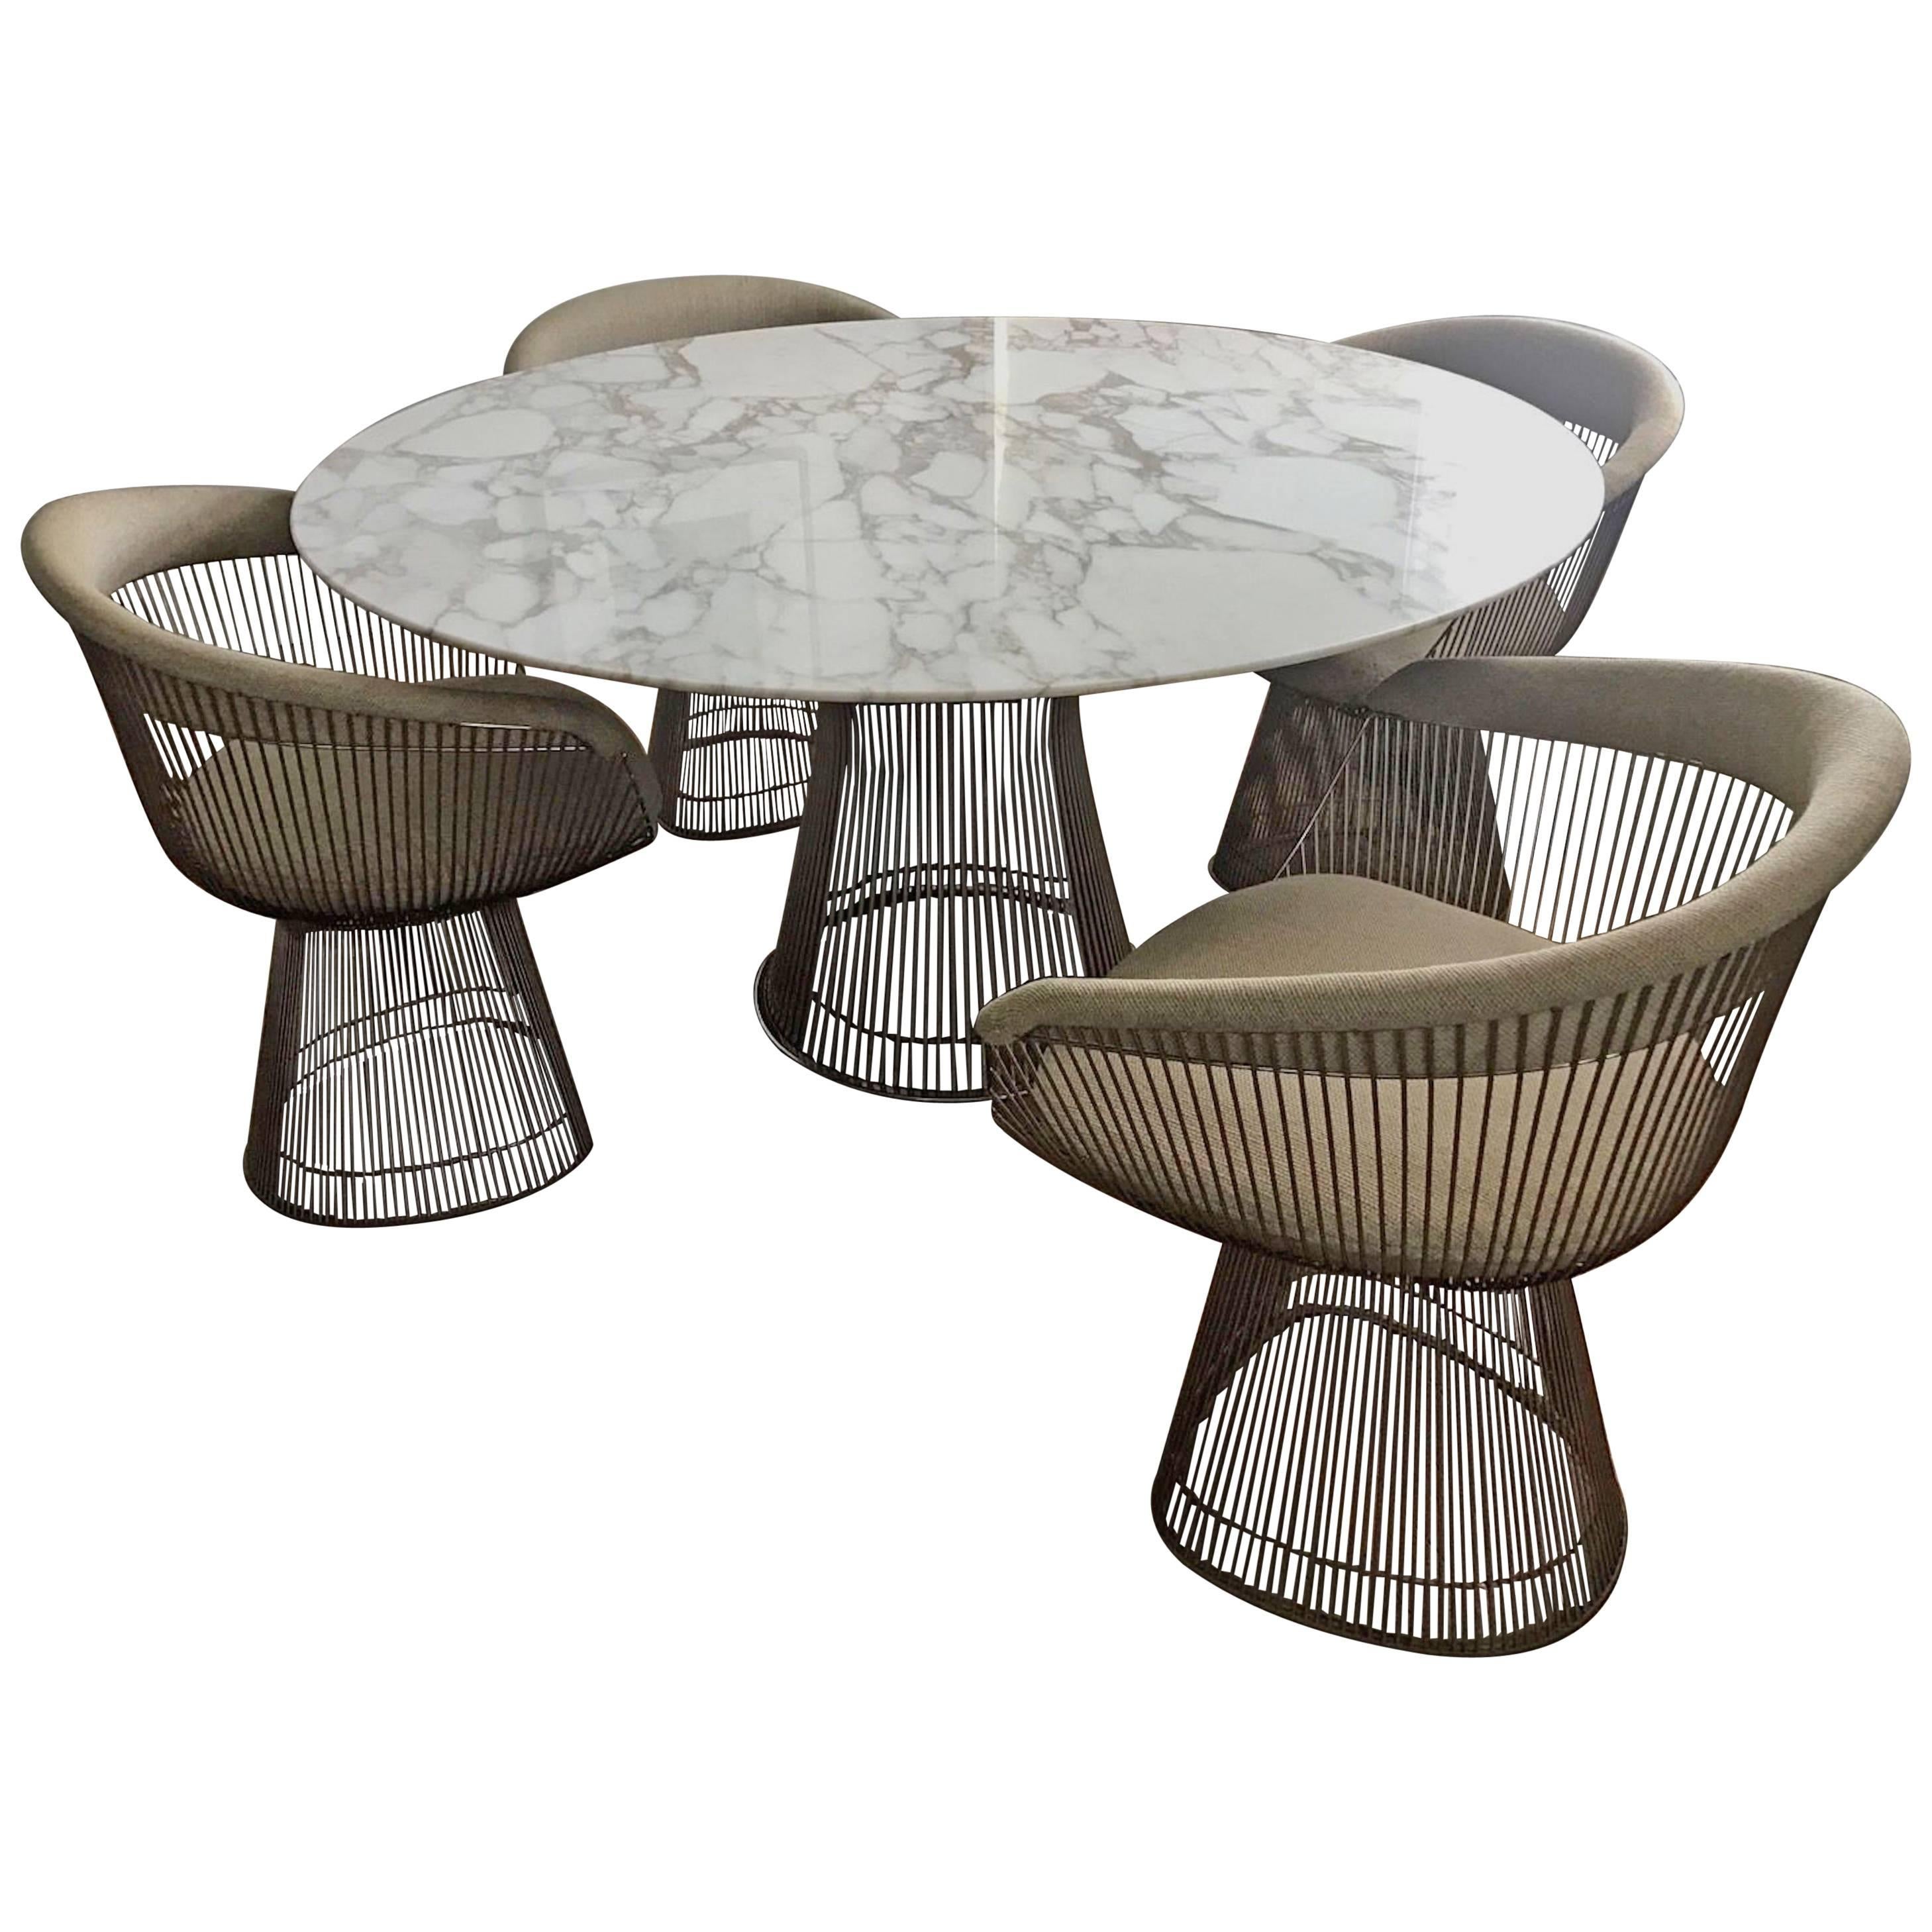 Knoll International Warren Platner Dining Set, Marble Table & Four Chairs, 1970s